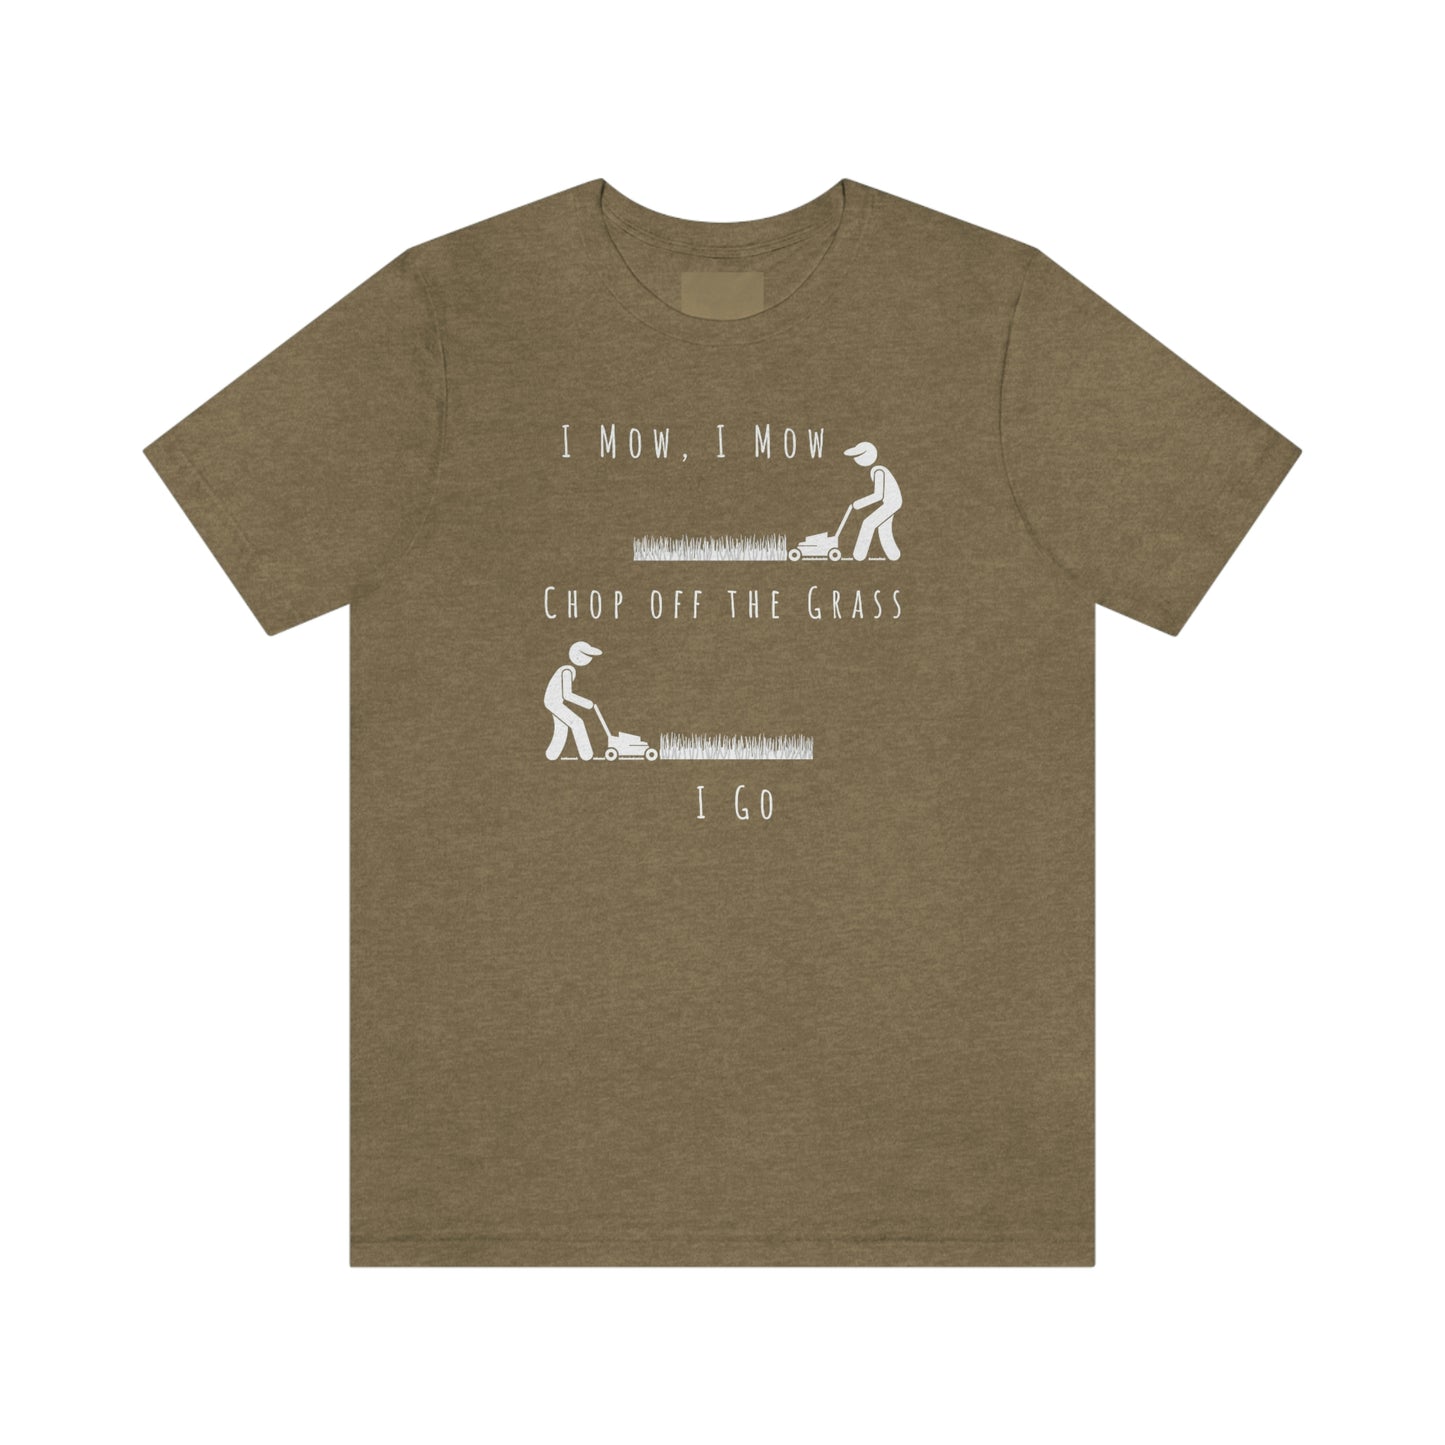 Family Tee I Mow Dad's Tee Father Gardening T Shirt Matches Boy Girl and Moms Tee Soft Jersey Short Sleeve Tee